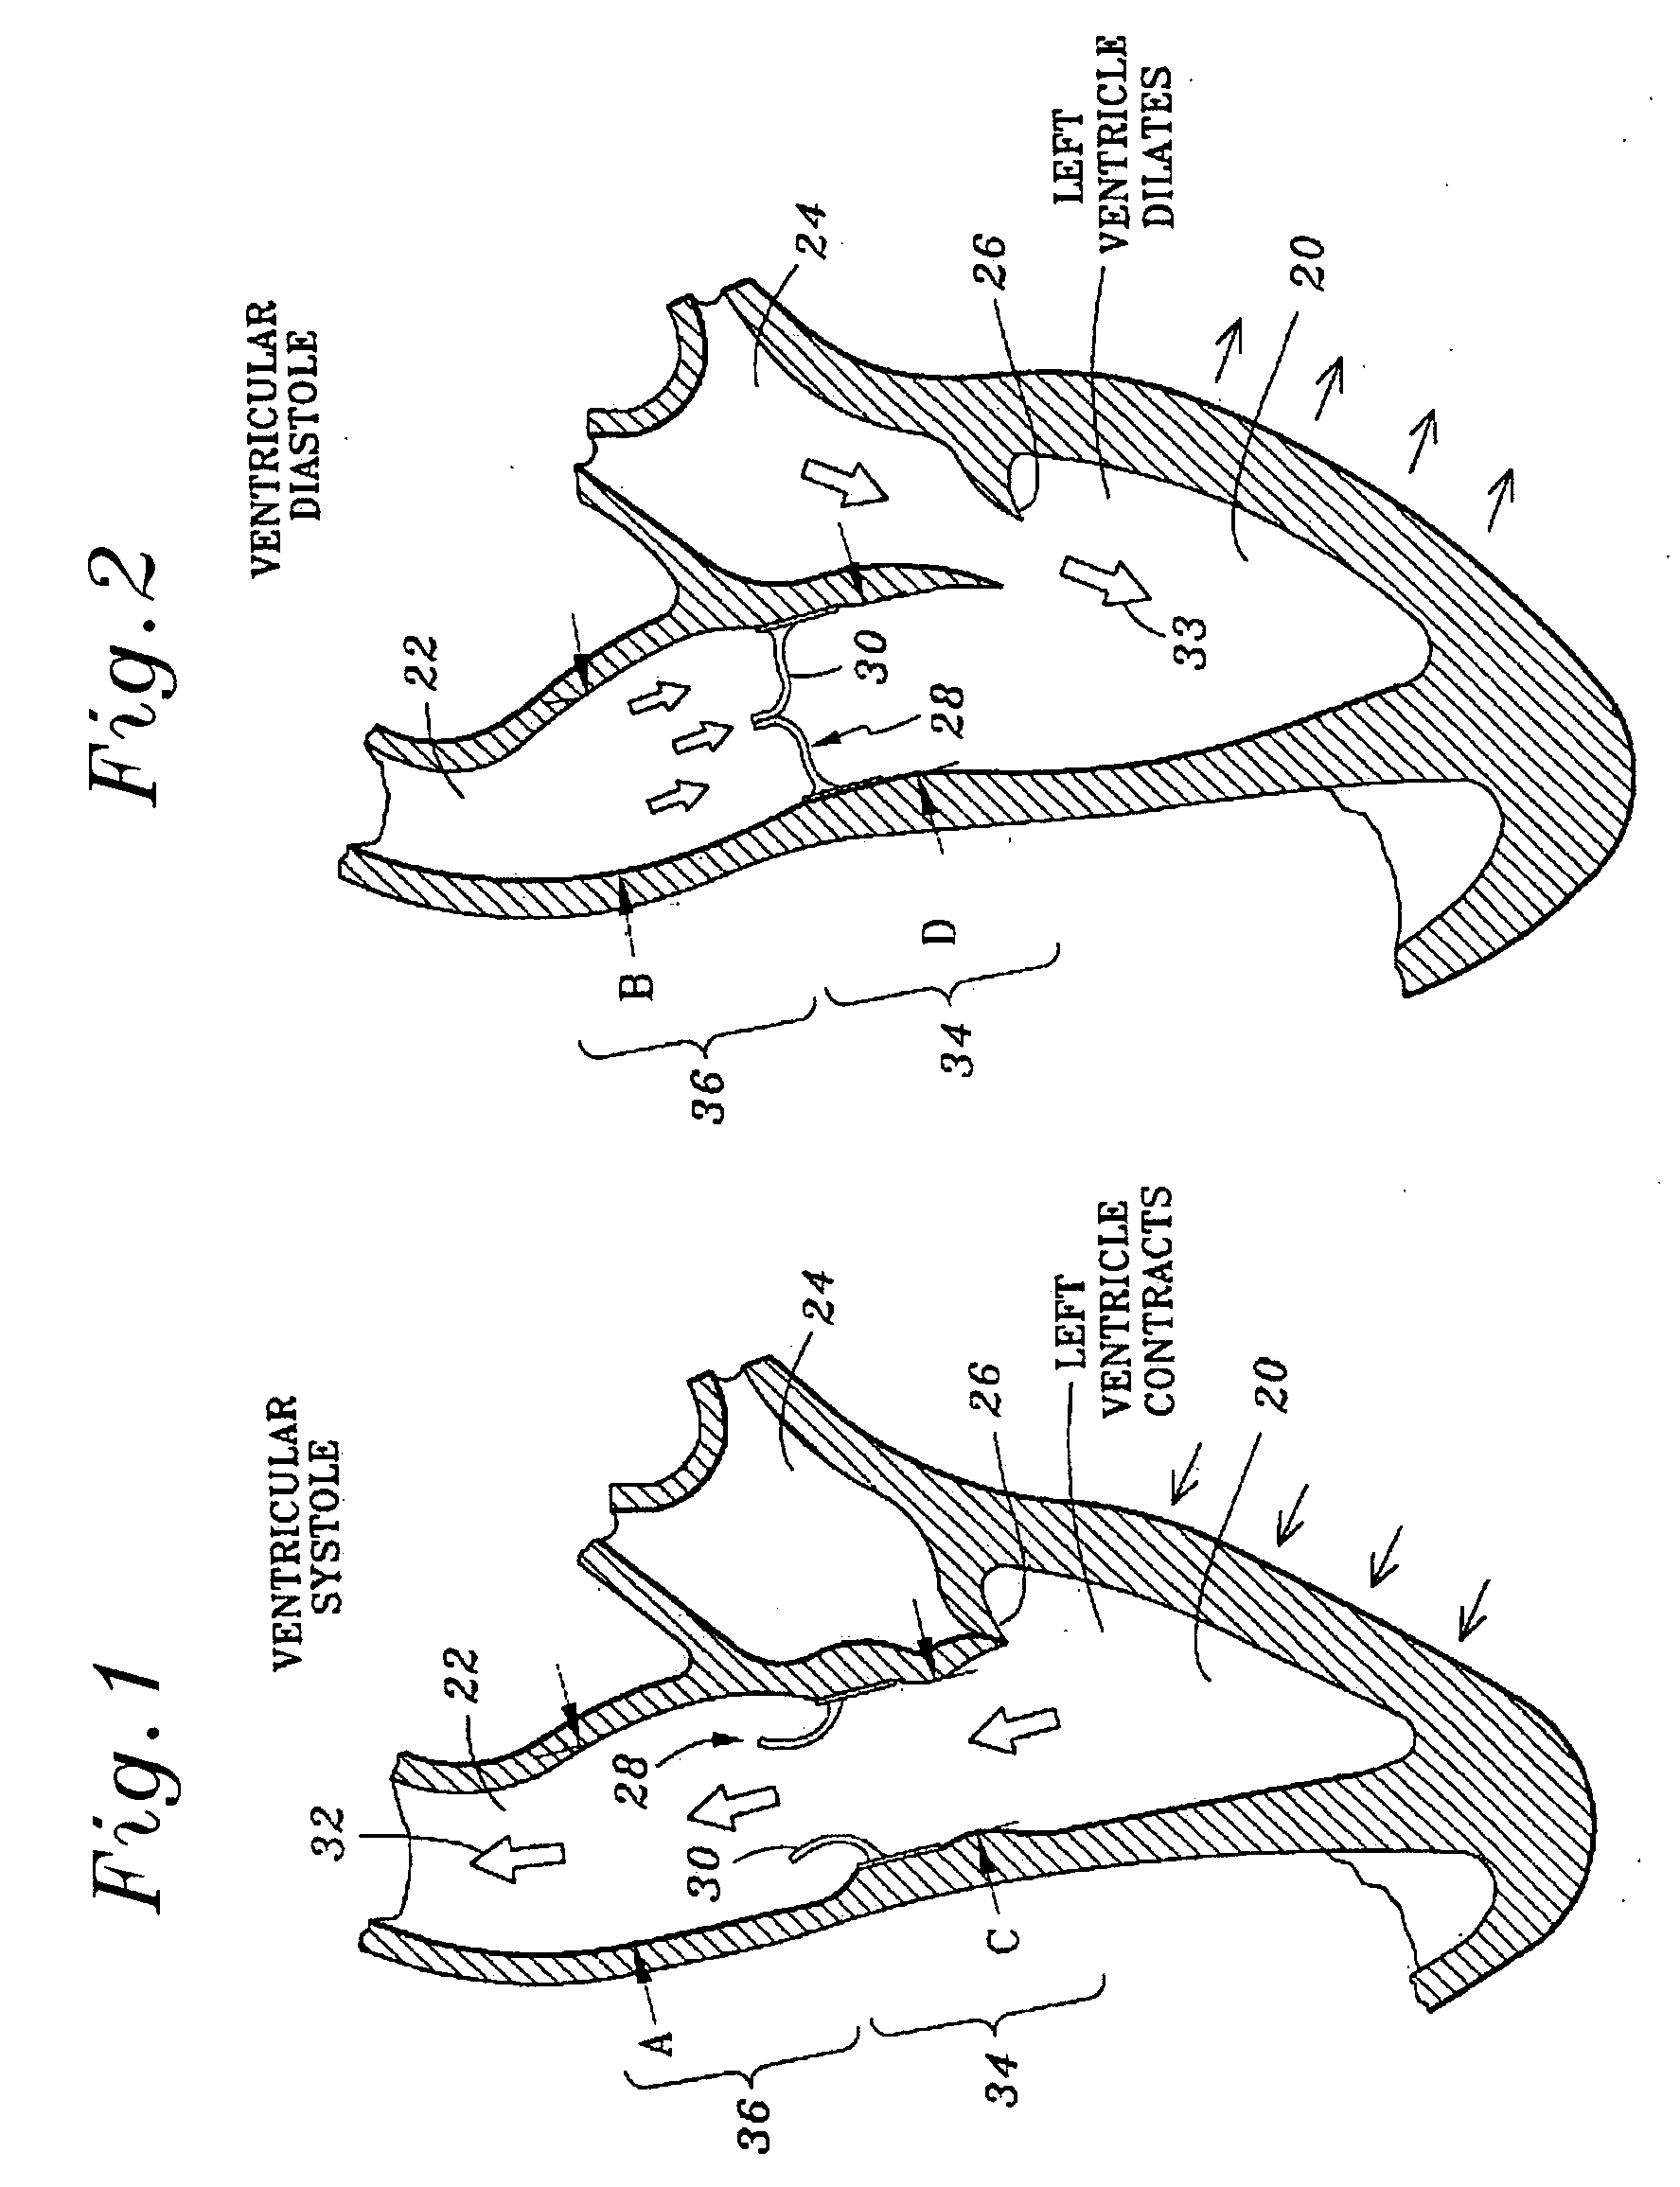 Highly flexible heart valve connecting band